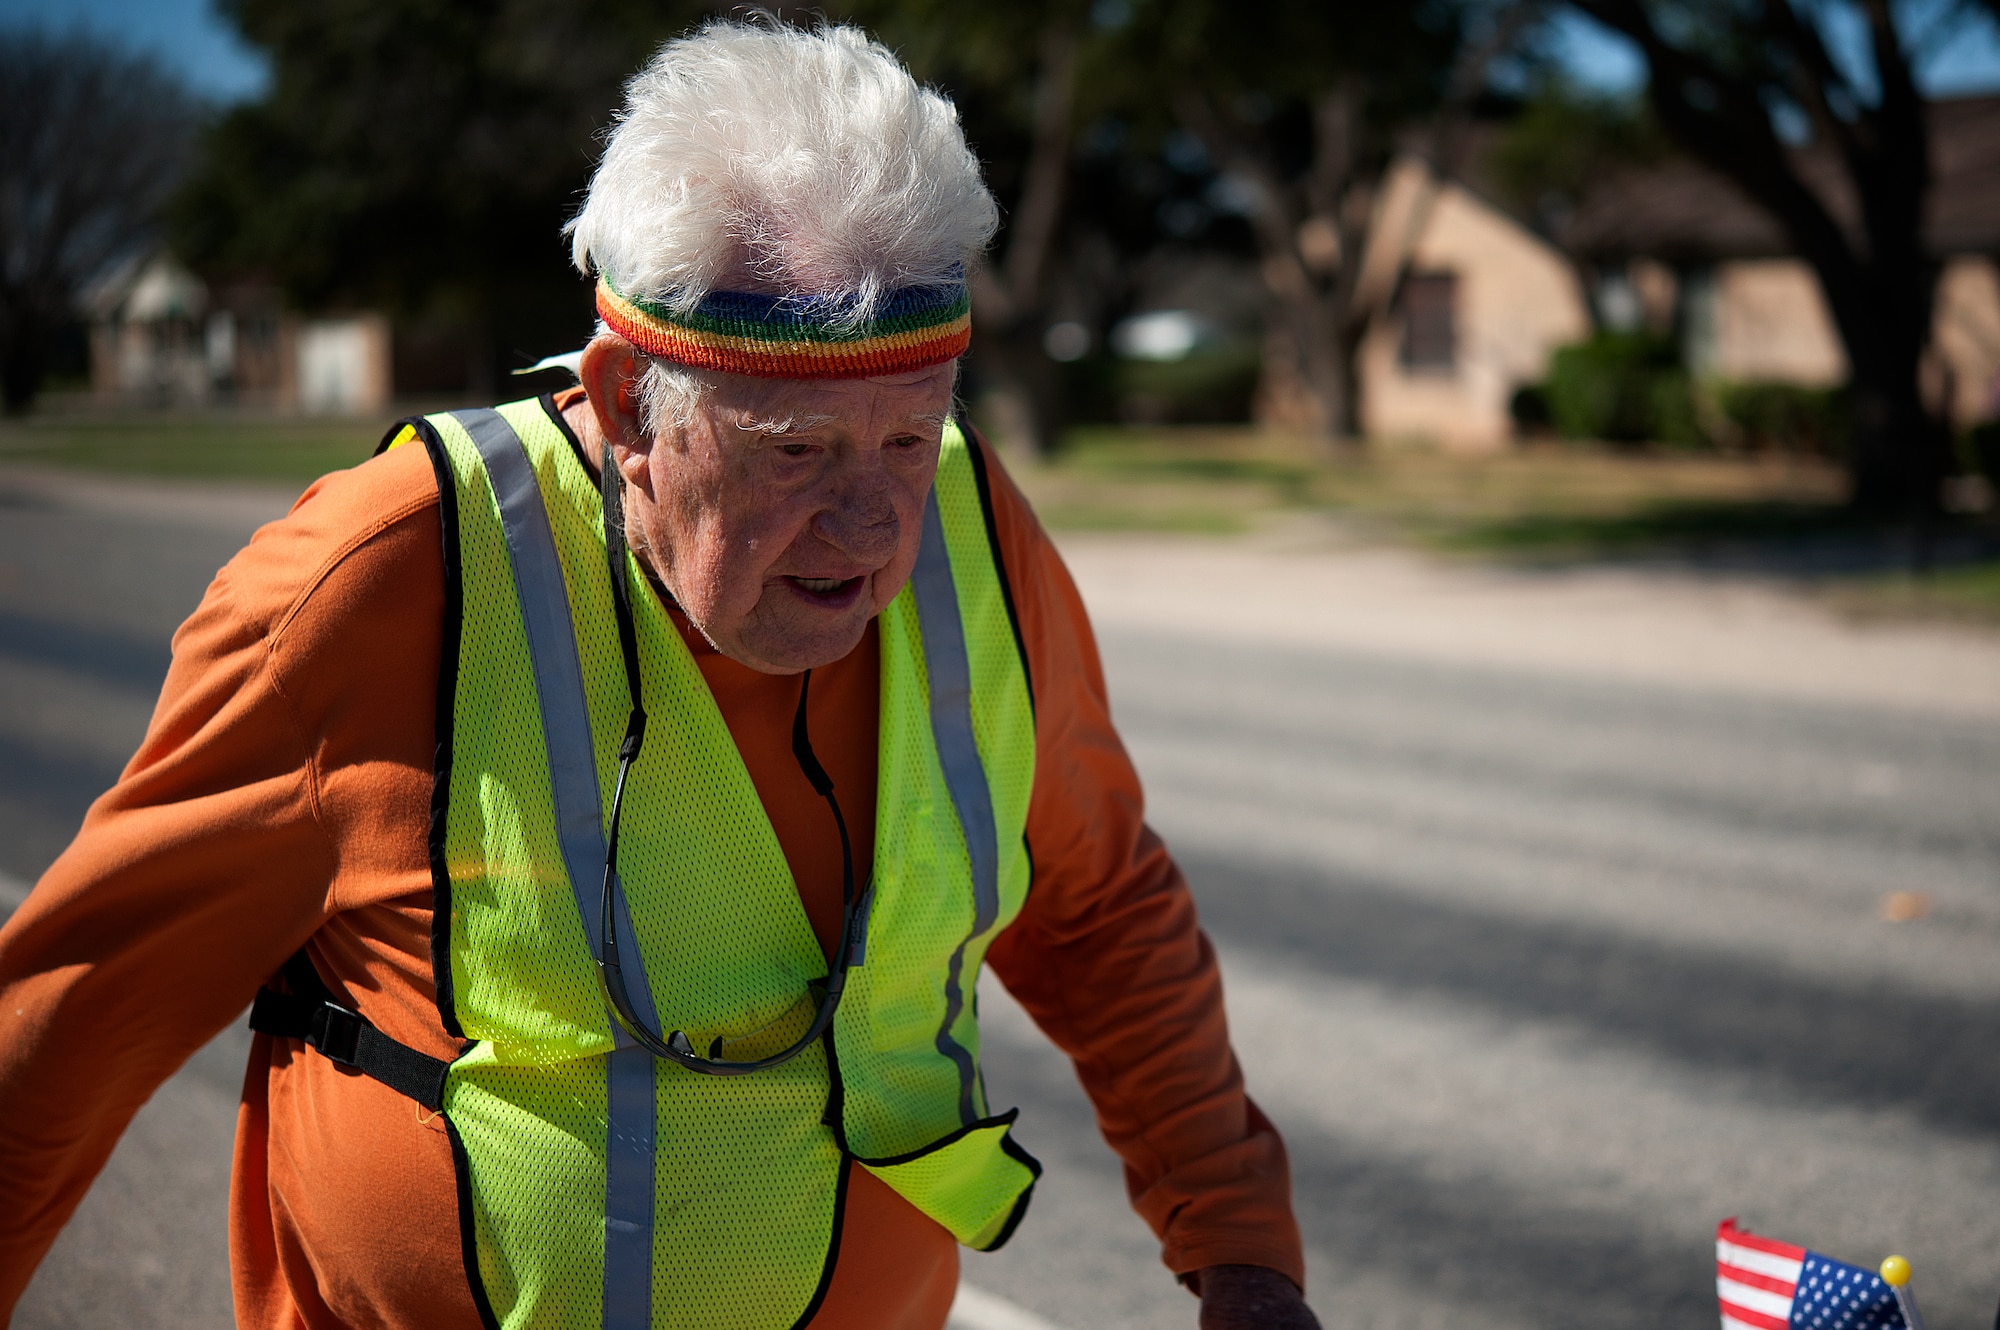 STERLING CITY, Texas -- Ernie Andrus, Navy World War II veteran, runs through Sterling City March 26. Andrus drives his recreational vehicle to various cities from California to Georgia where he completes a distance run at each stop. He averages from a half to full marathon a week. (U.S. Air force photo/ Airman 1st Class Devin Boyer)